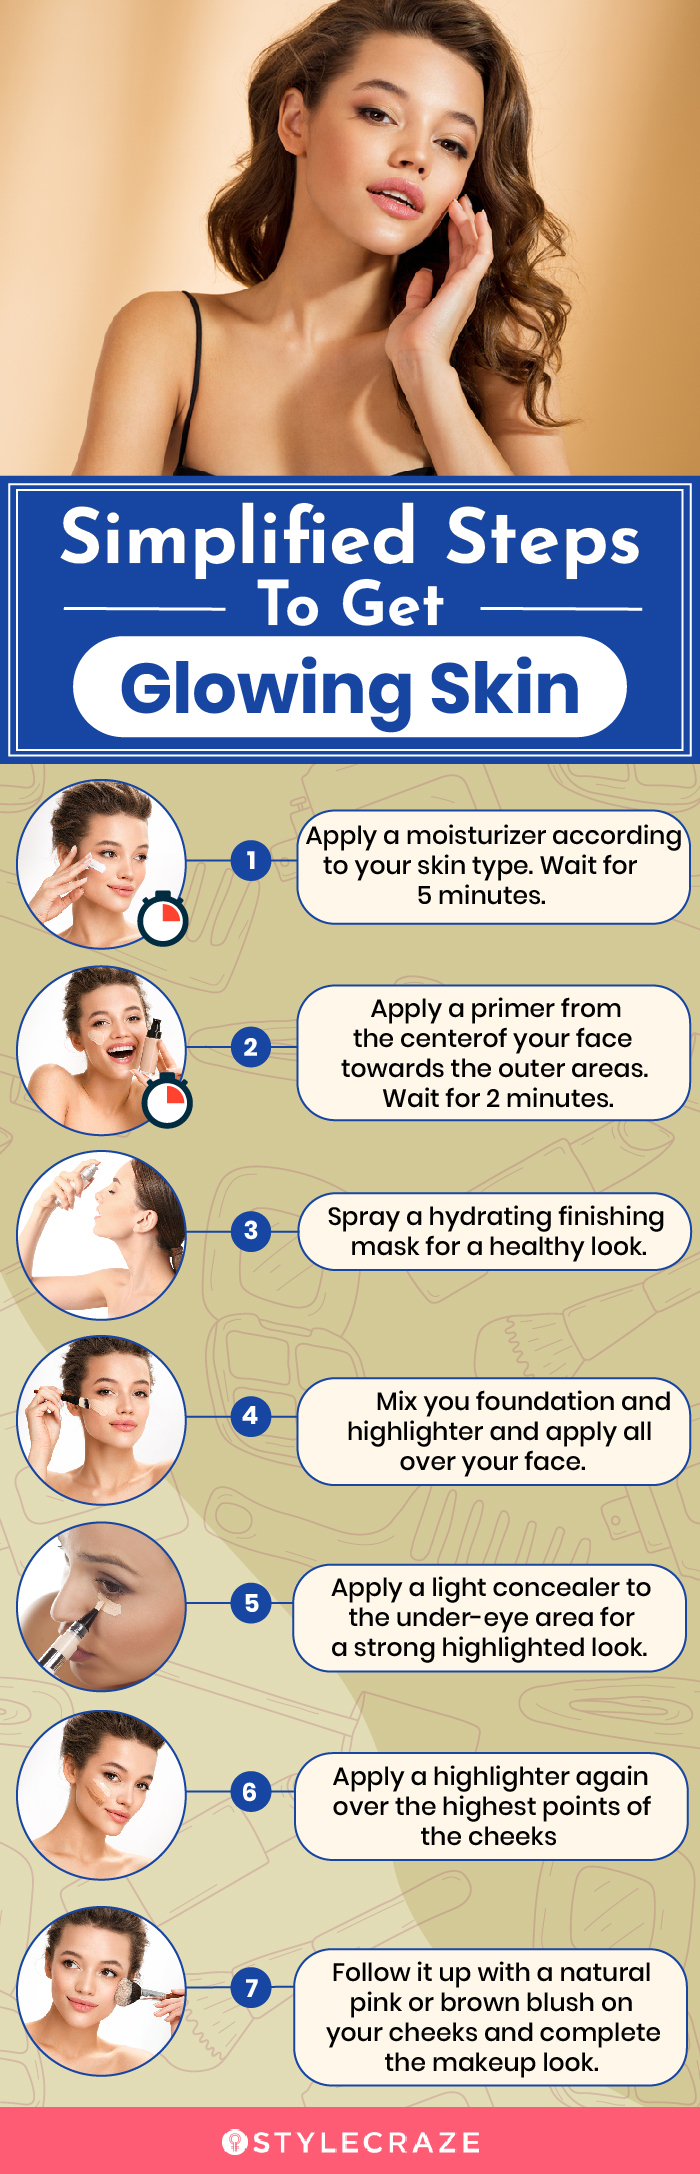 simplifed steps to get glowing skin (infographic)